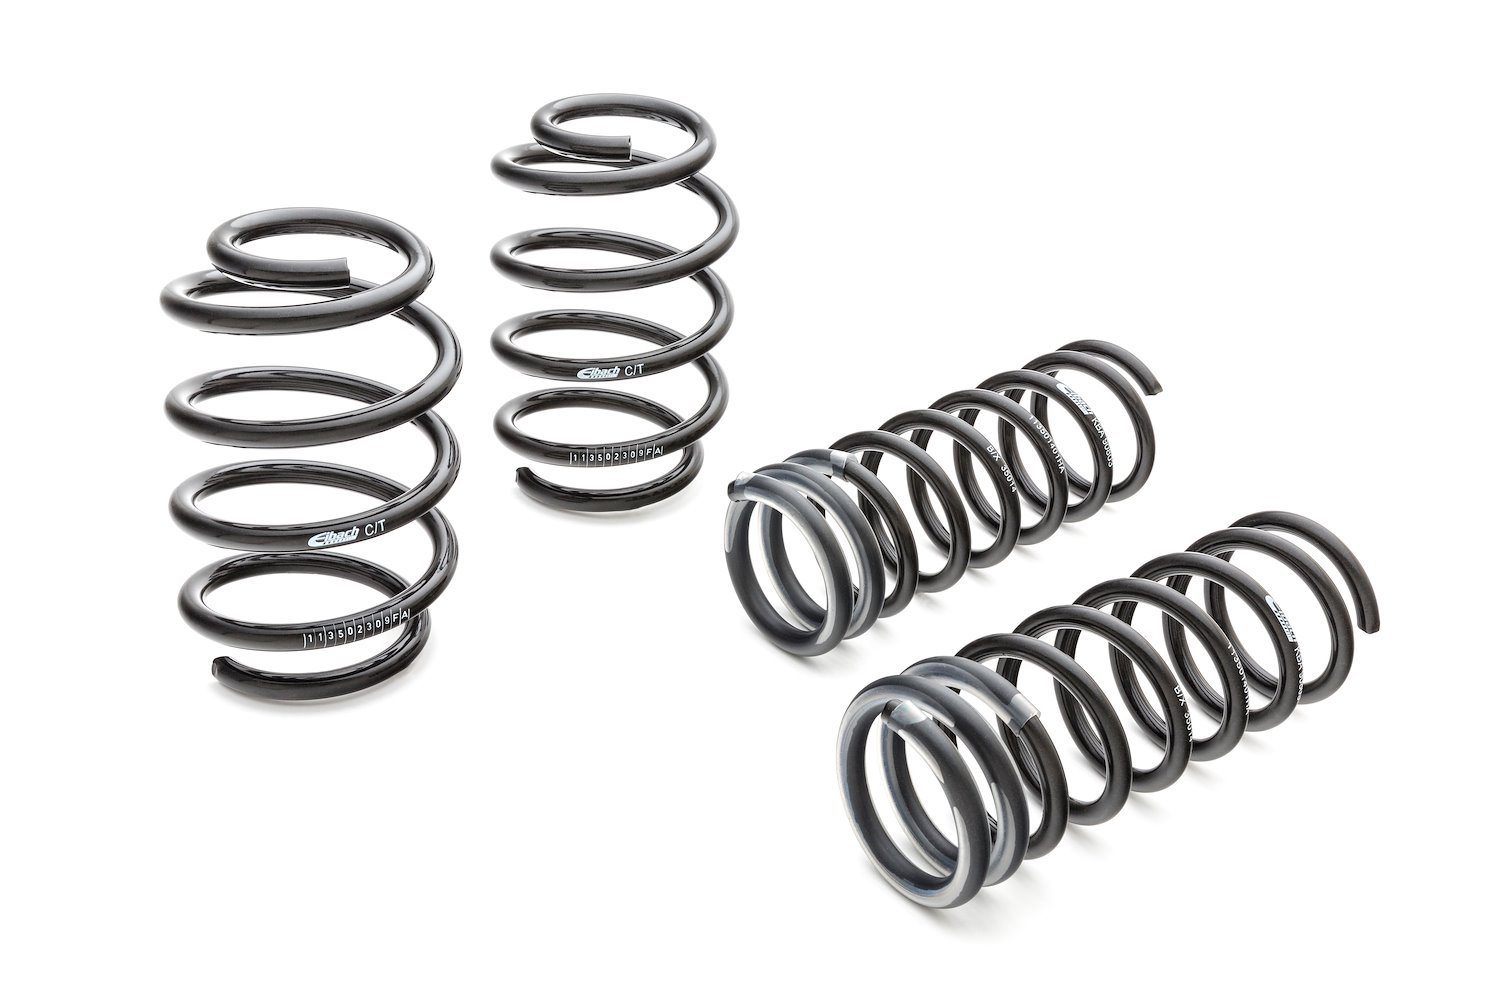 3514.140 Pro-Kit Lowering Springs 1983-1993 Mustang V8 convertible - 1.200 in. Front/1 in. Rear Drop